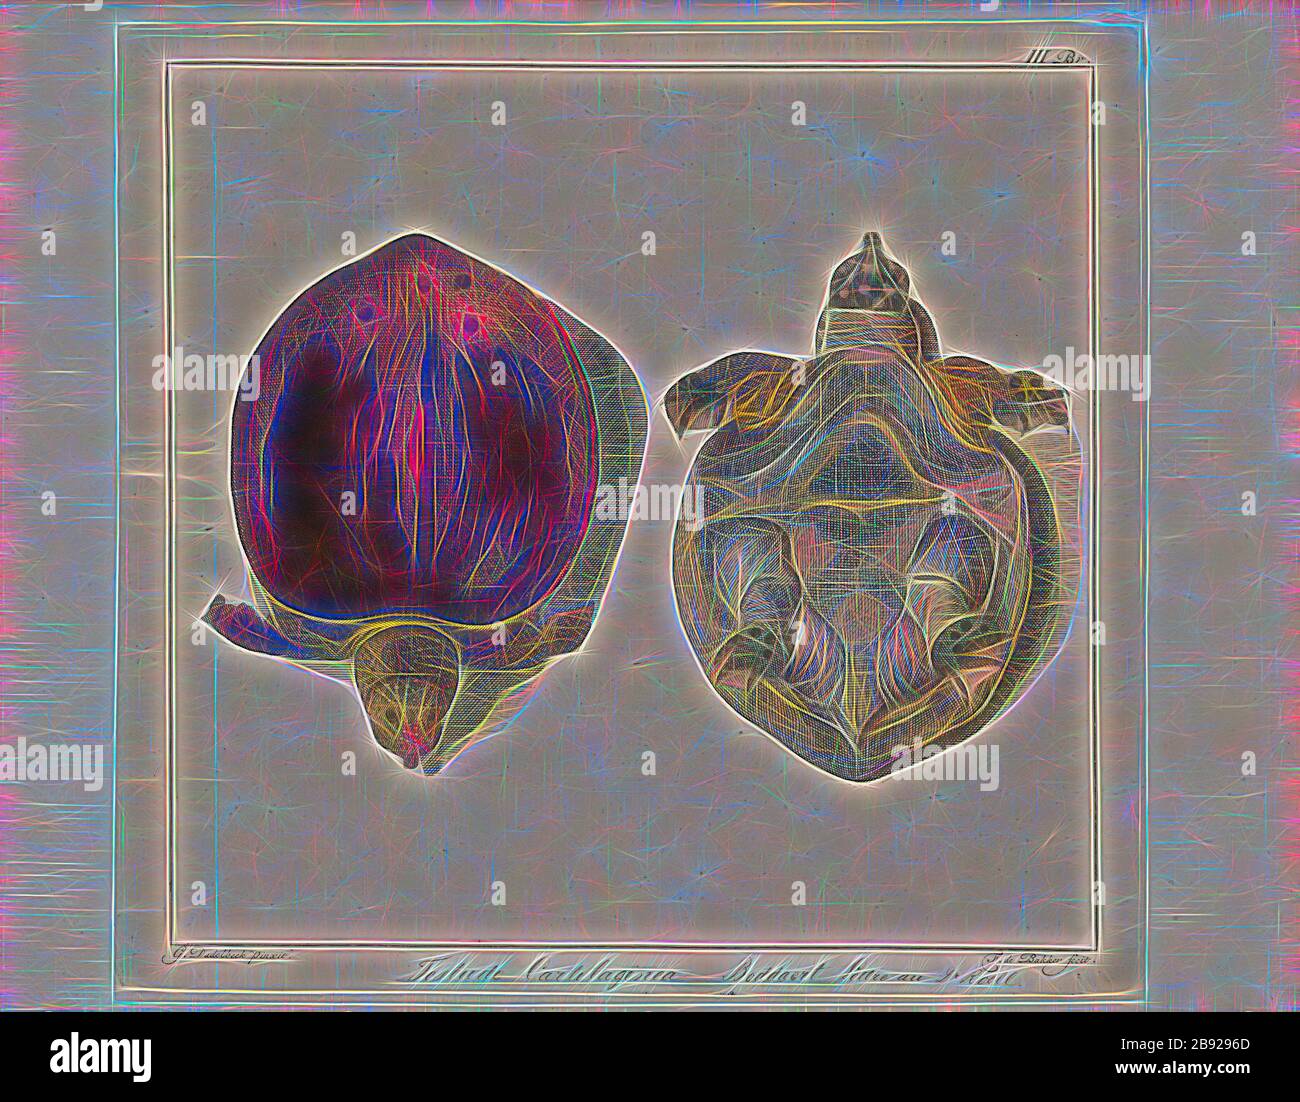 Testudo cartilaginea, Print, The Asiatic softshell turtle or black-rayed softshell turtle (Amyda cartilaginea) is a species of softshell turtle in the Trionychidae family. It is not the only softshell turtle in Asia (most trionychines are Asian)., 1700-1880, Reimagined by Gibon, design of warm cheerful glowing of brightness and light rays radiance. Classic art reinvented with a modern twist. Photography inspired by futurism, embracing dynamic energy of modern technology, movement, speed and revolutionize culture. Stock Photo